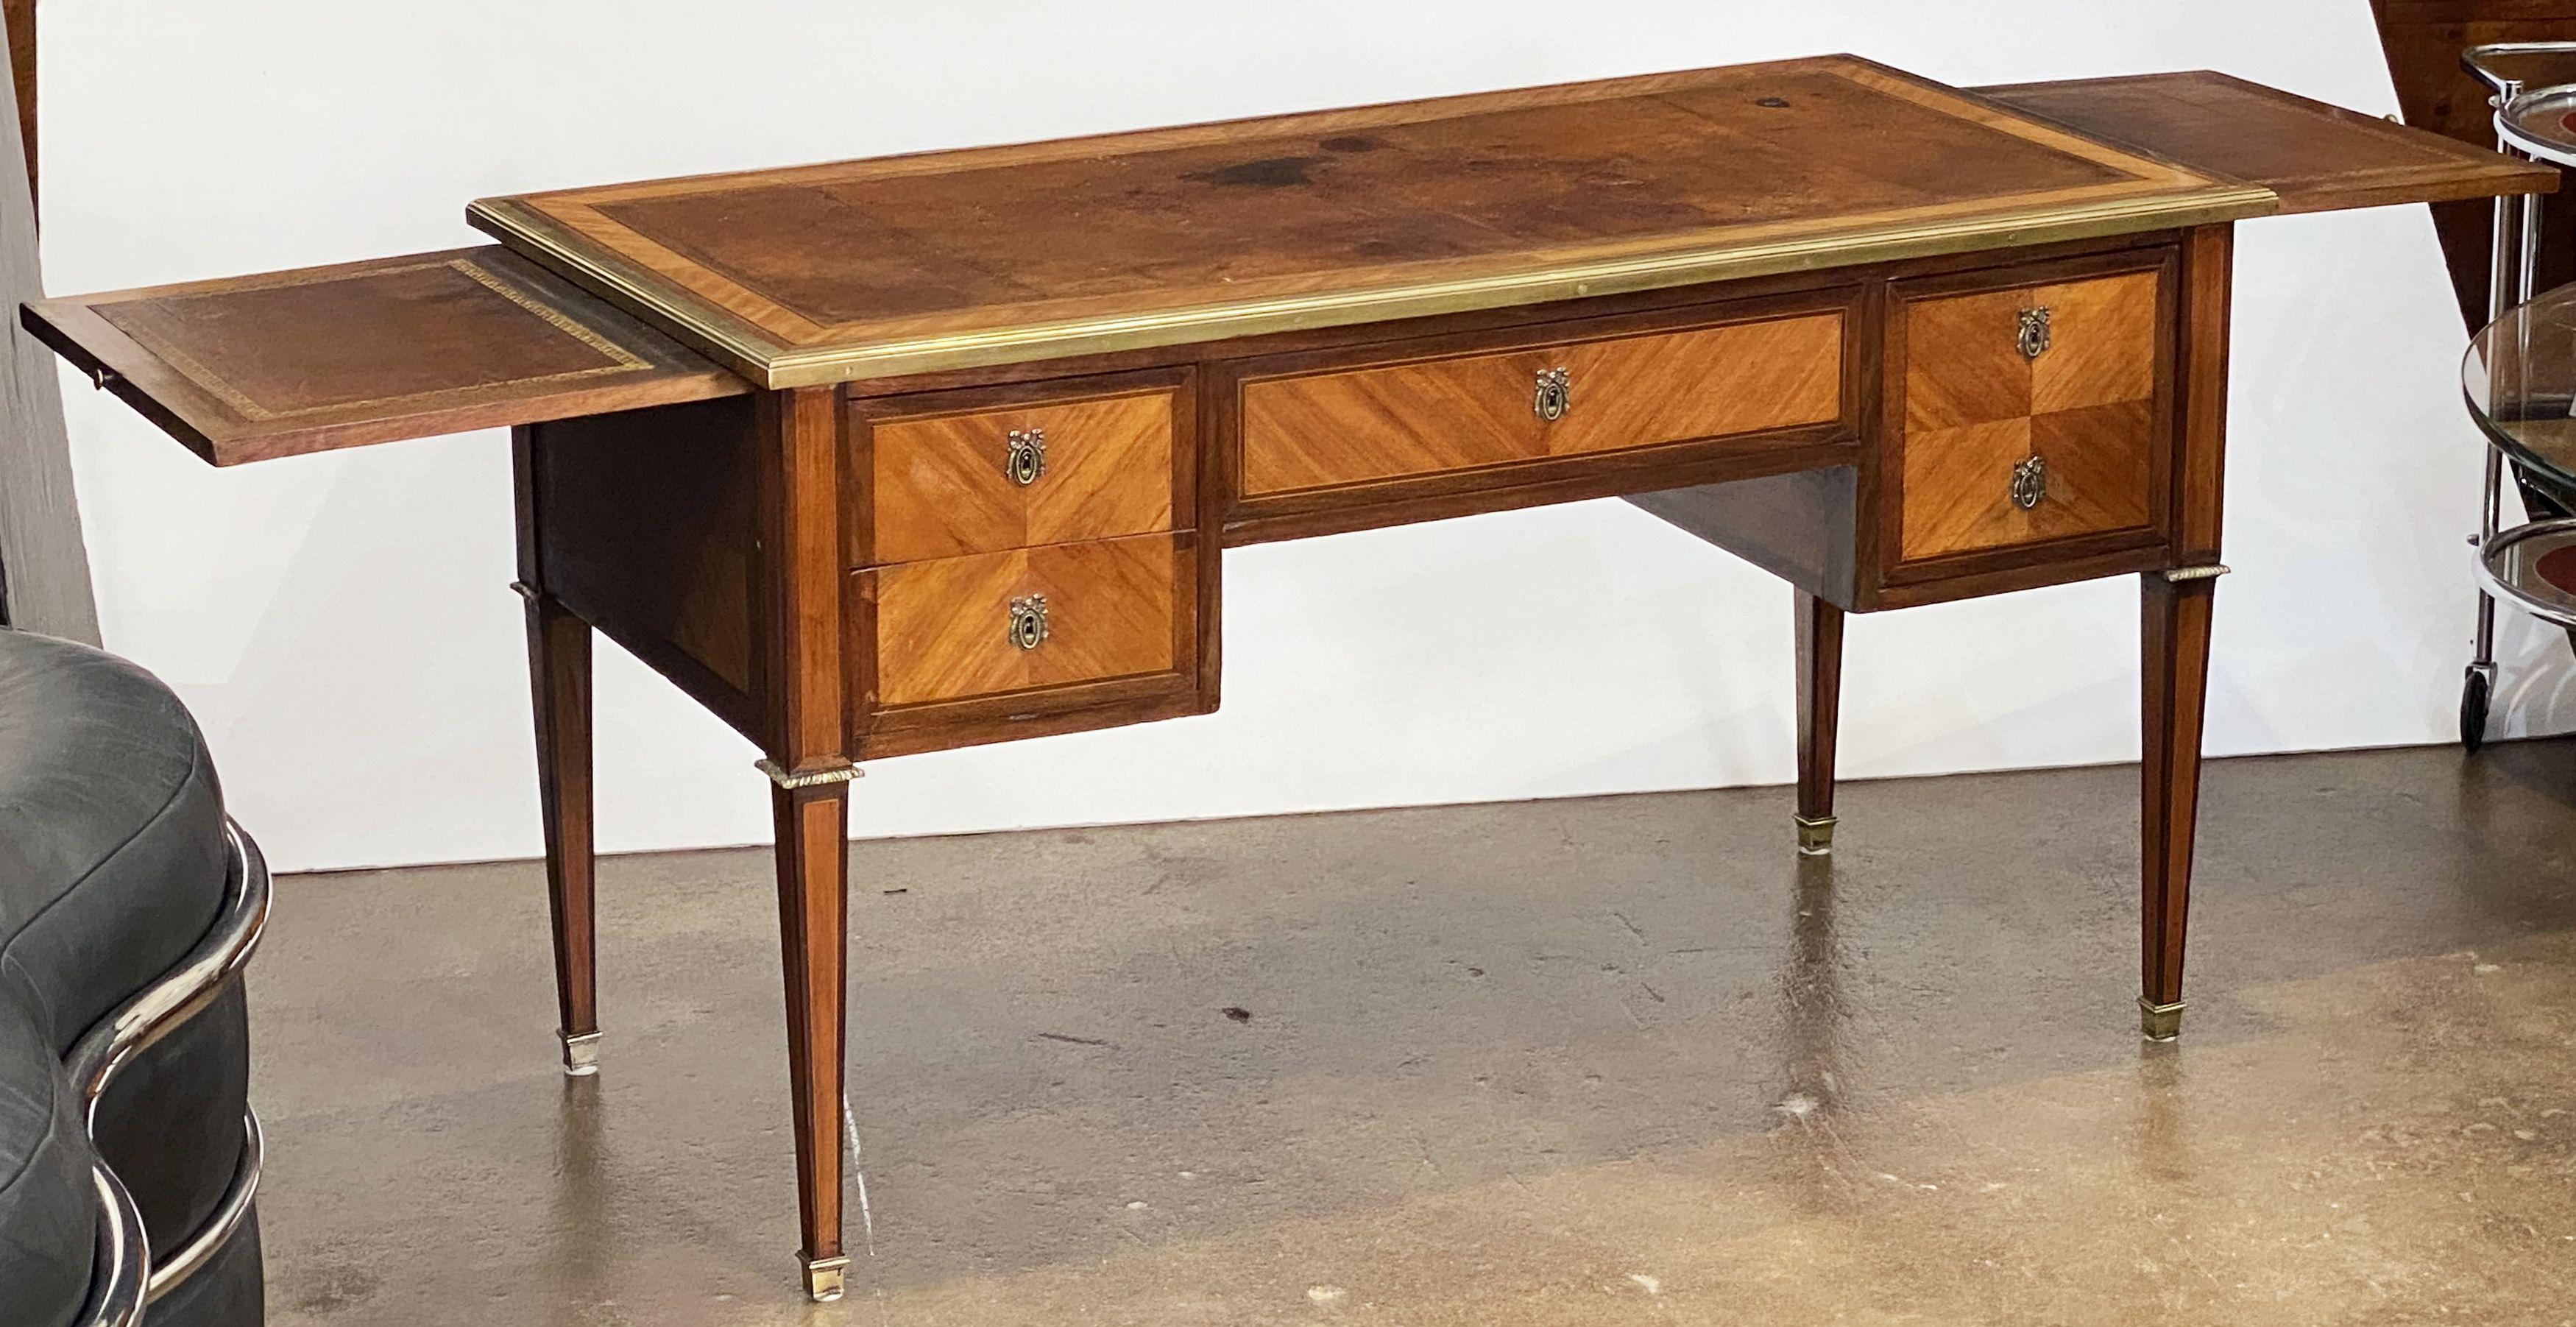 A fine French Directoire period writing table or desk of walnut and mahogany from the late 18th century, featuring an embossed leather top with brass accents, with two brushing slides and four drawers with brass escutcheons, the back with faux